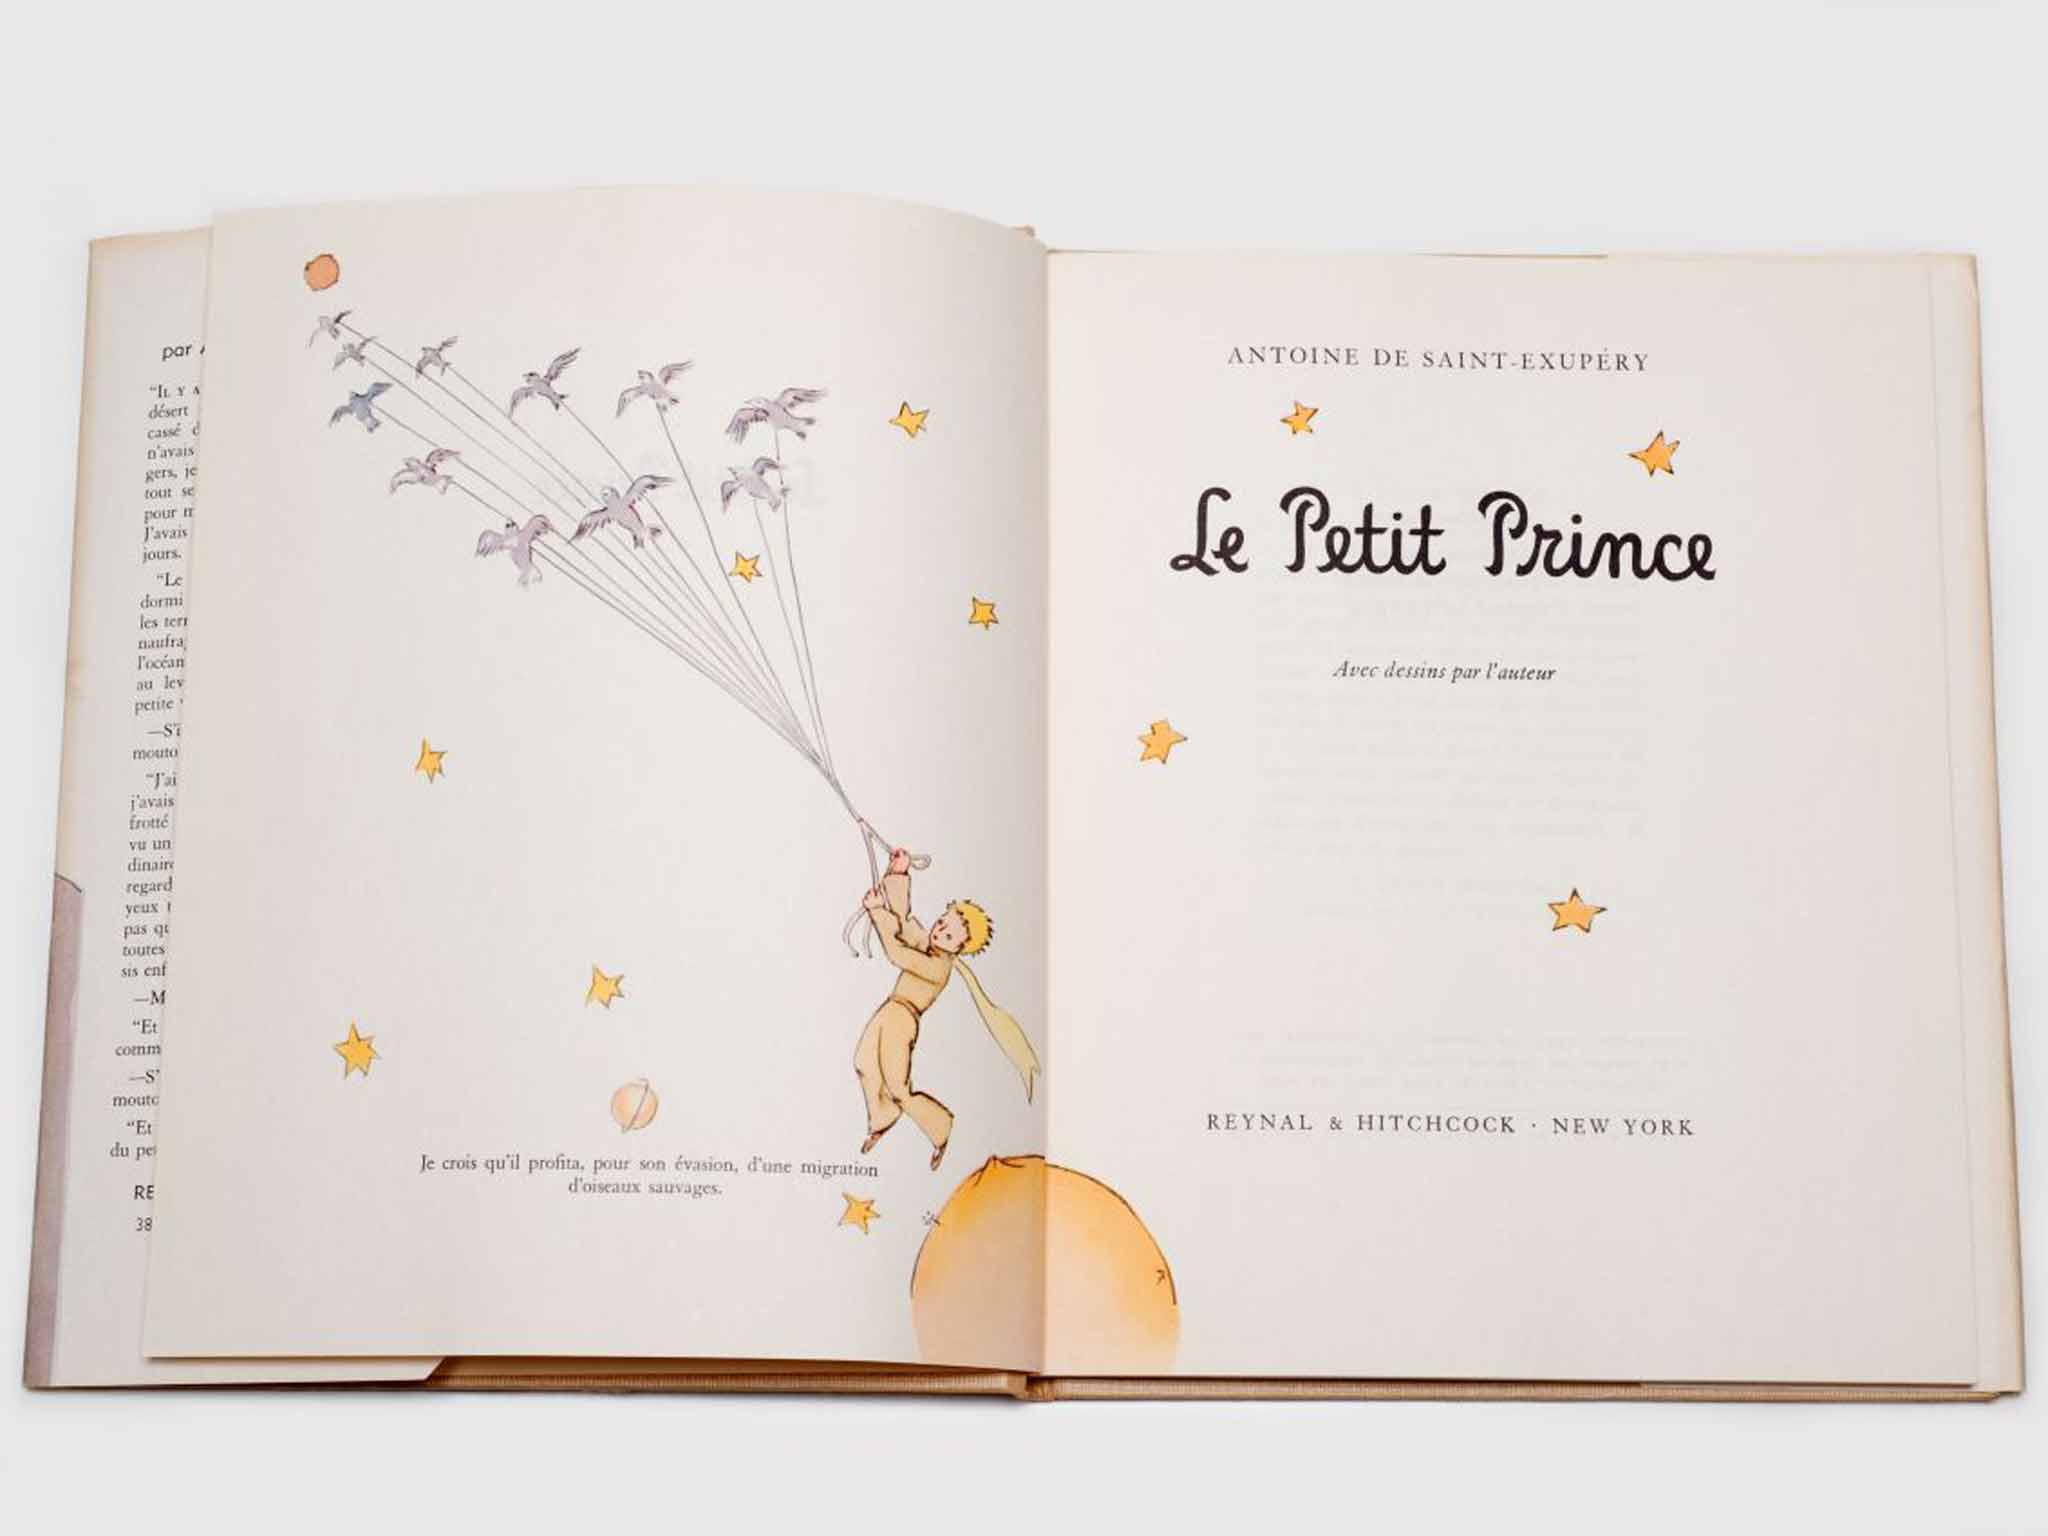 A scene from the new animated film of 'The Little Prince'